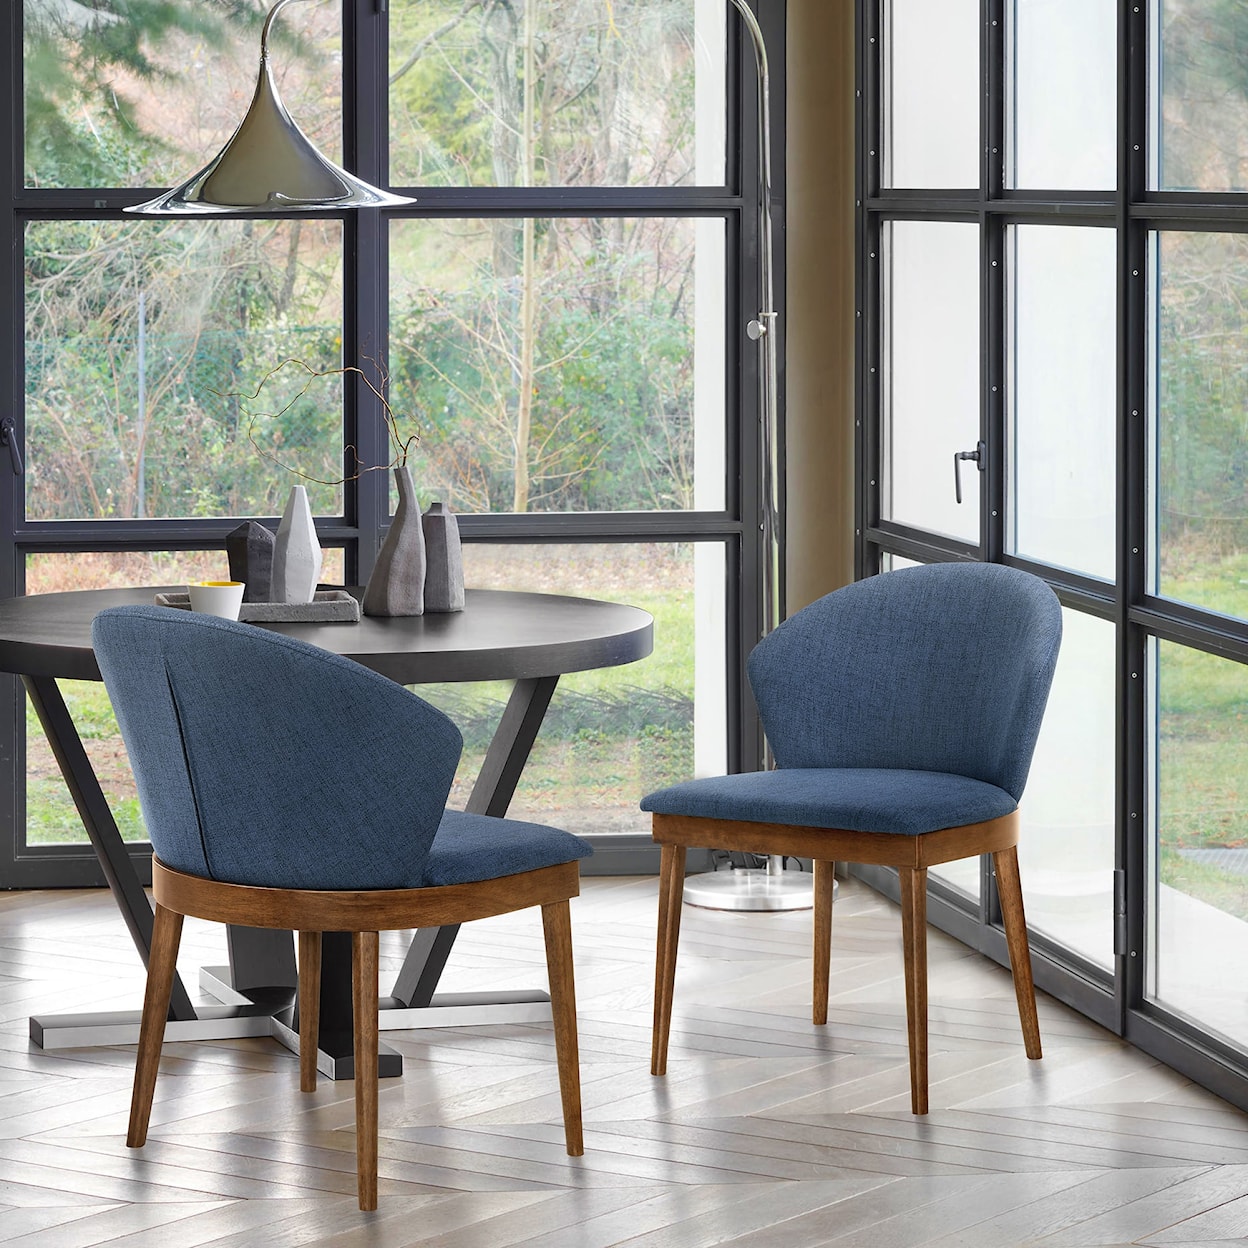 Armen Living Juno Set of 2 Side Chairs